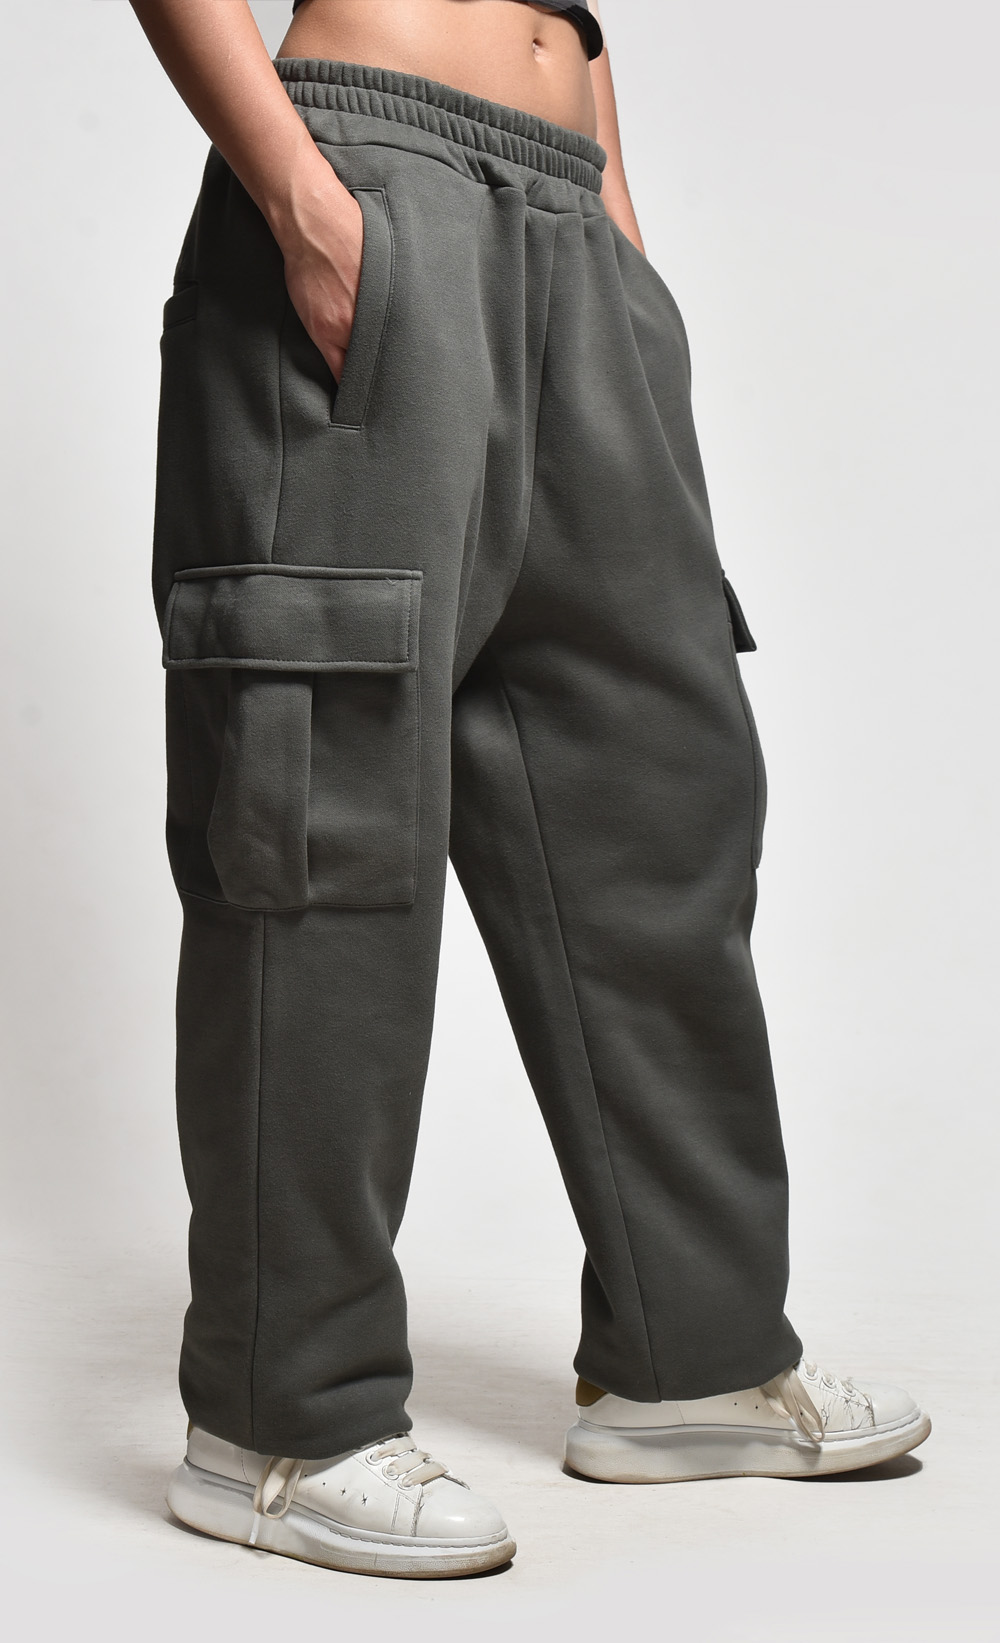 Call Of Duty Warzone Sweatpants - Insert Coin Clothing